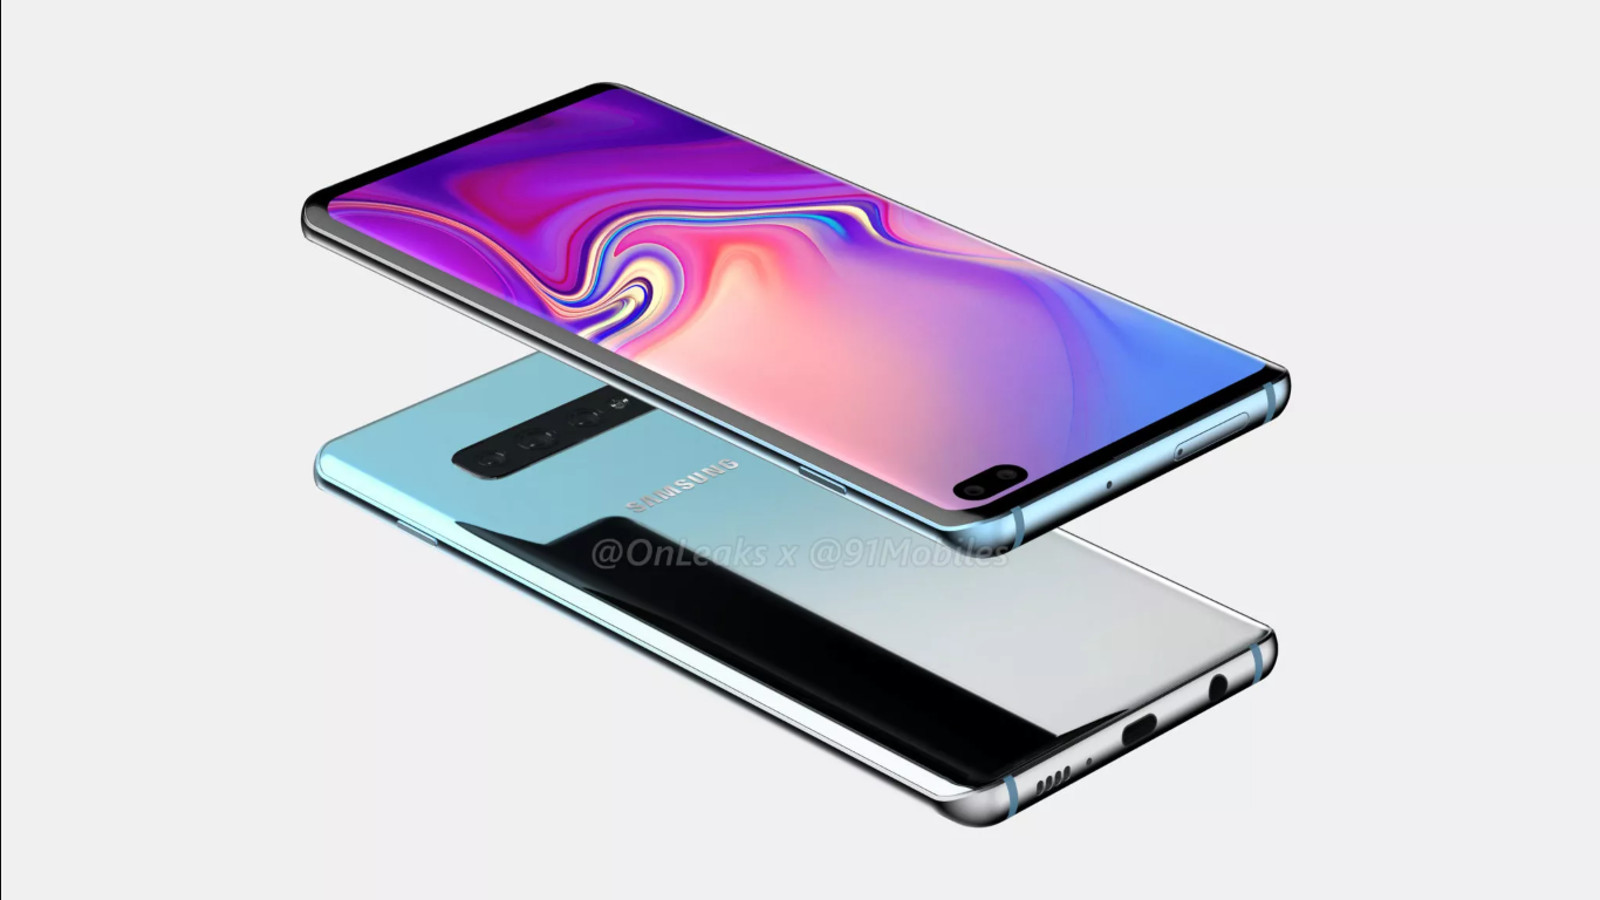 The Galaxy S10 Plus render by 91Mobiles.